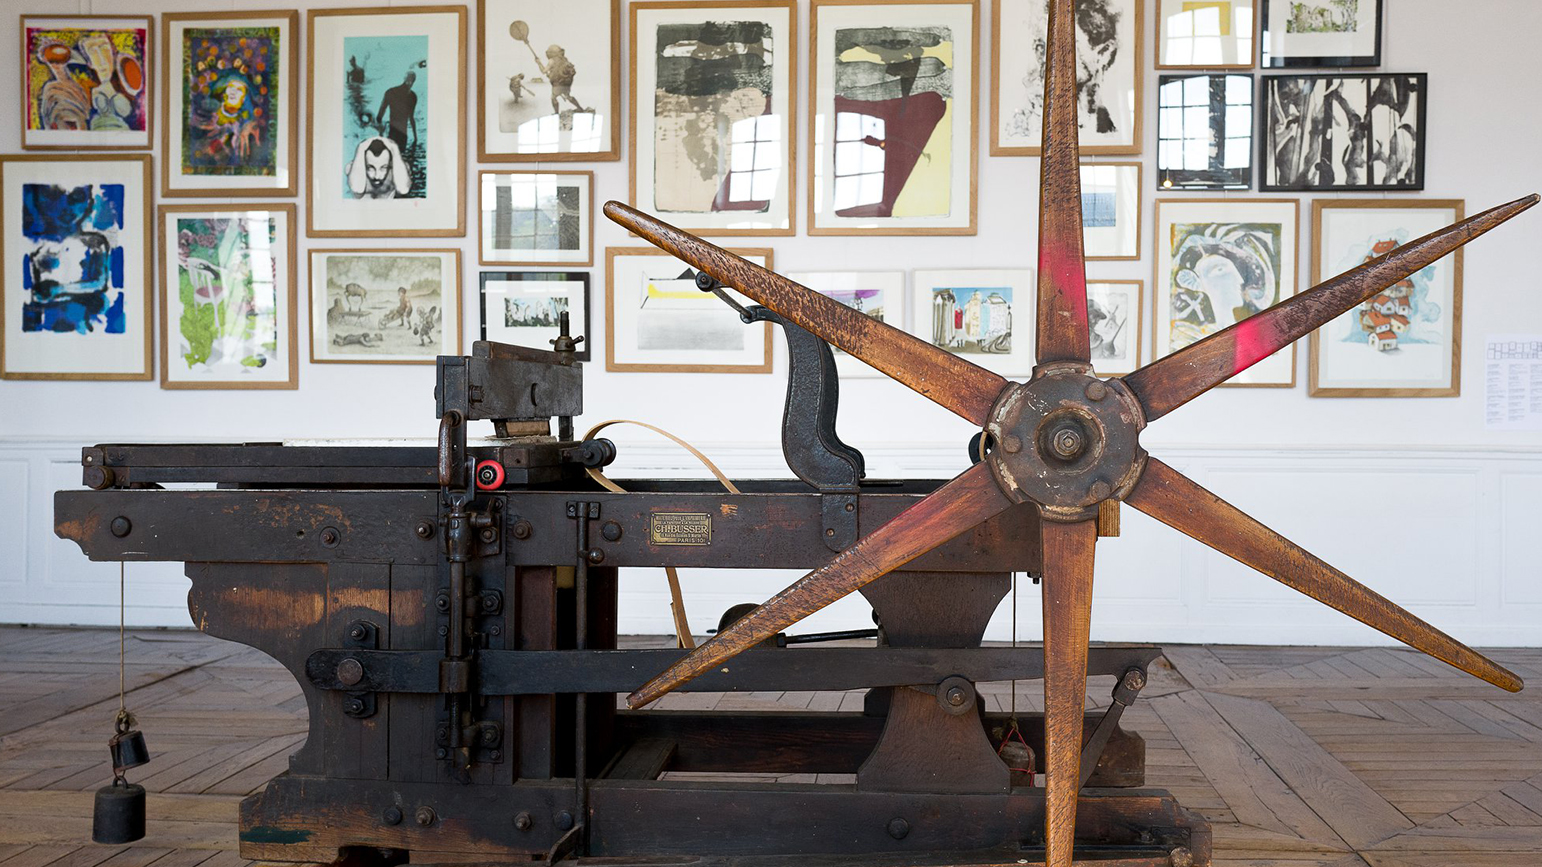 Photograph of a manual printing press with framed prints hung salon-style behind it.